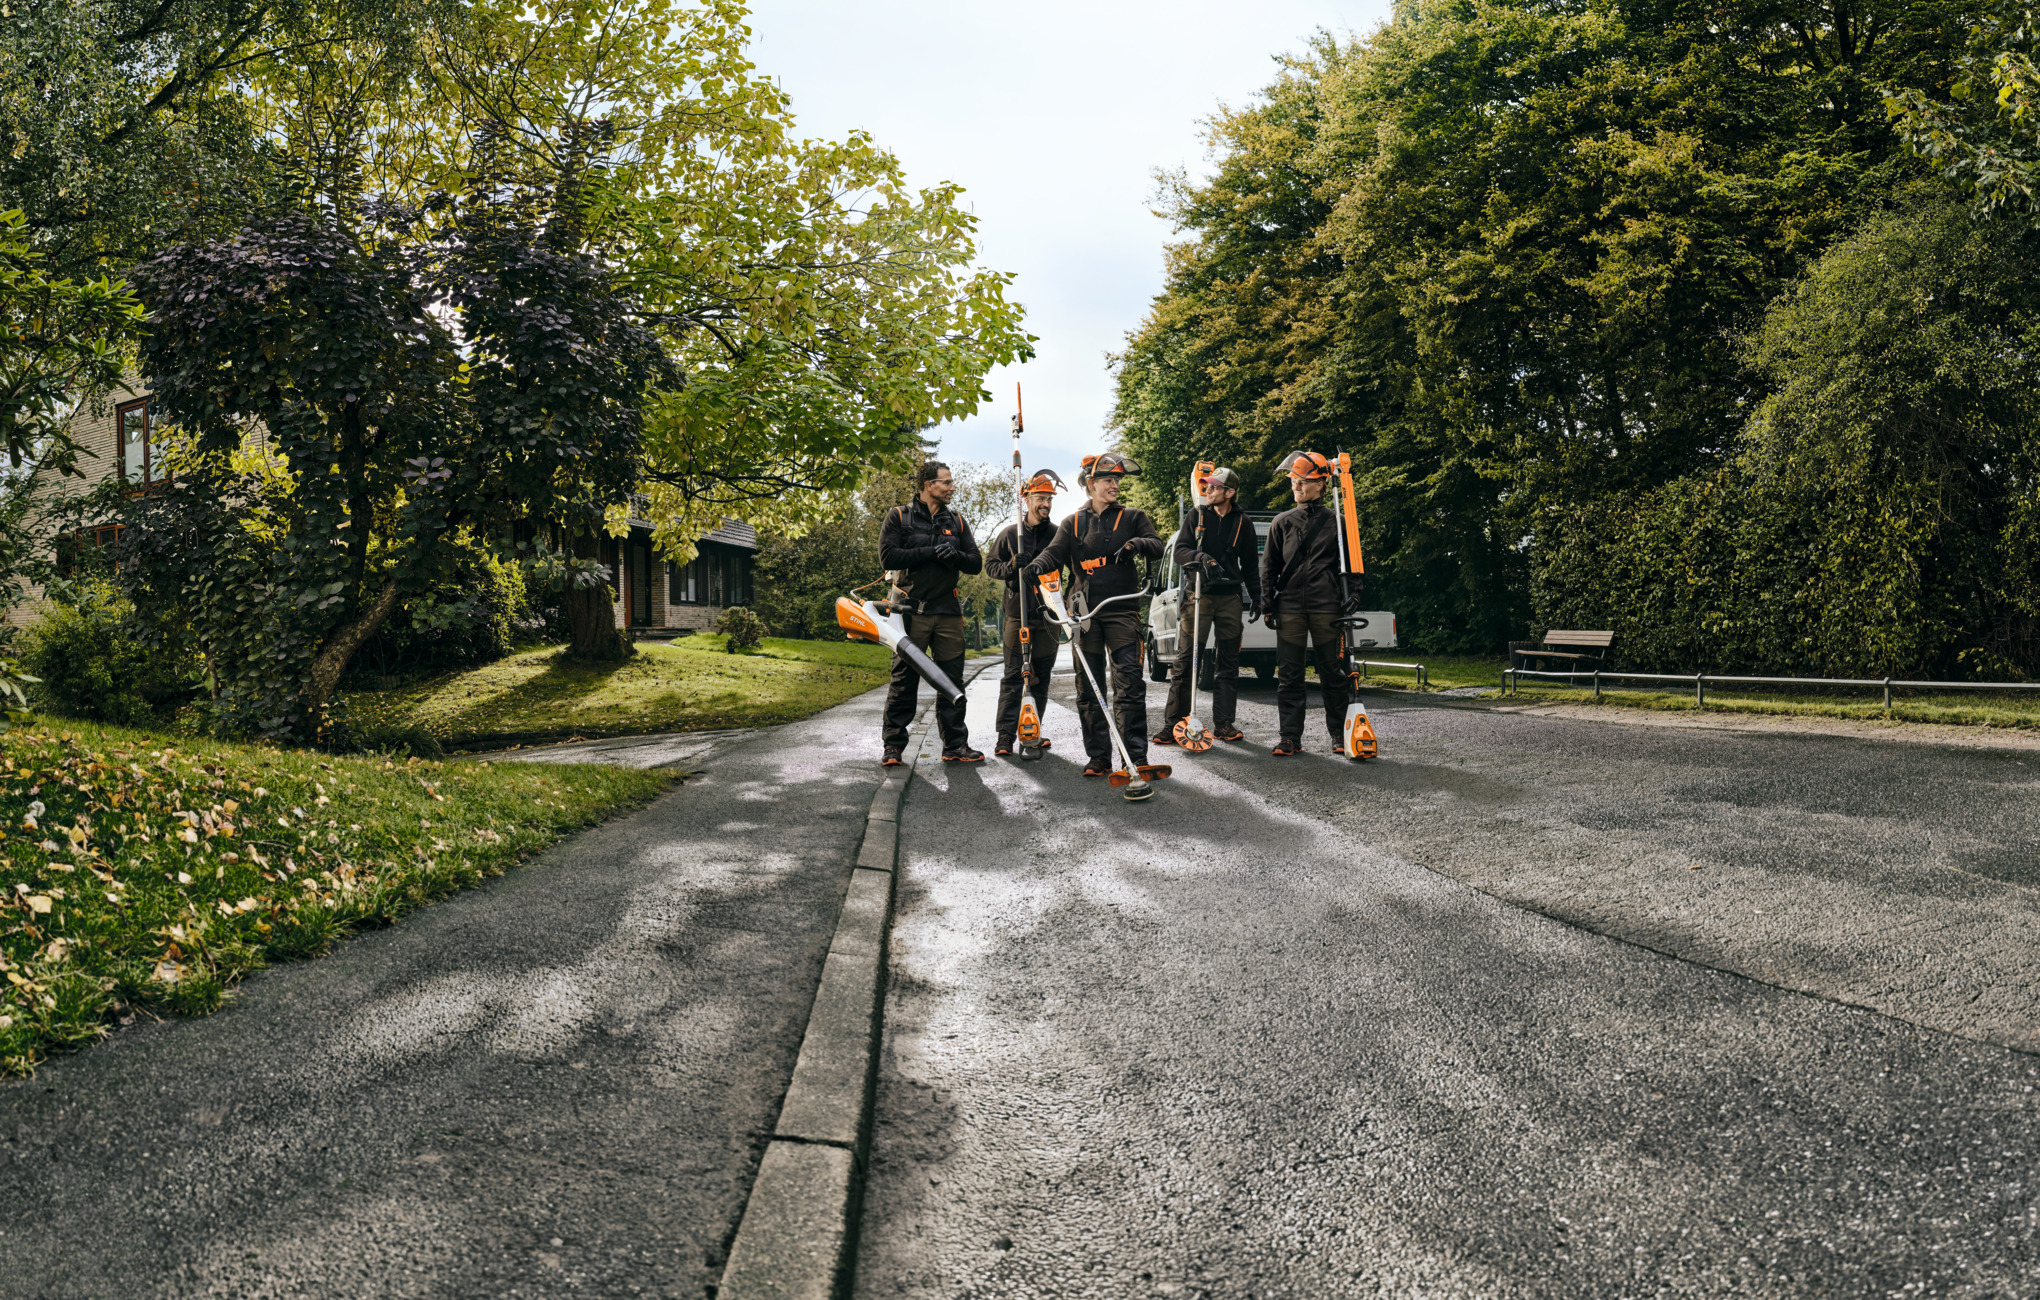 Five STIHL professionals walking along a road holding cordless power tools